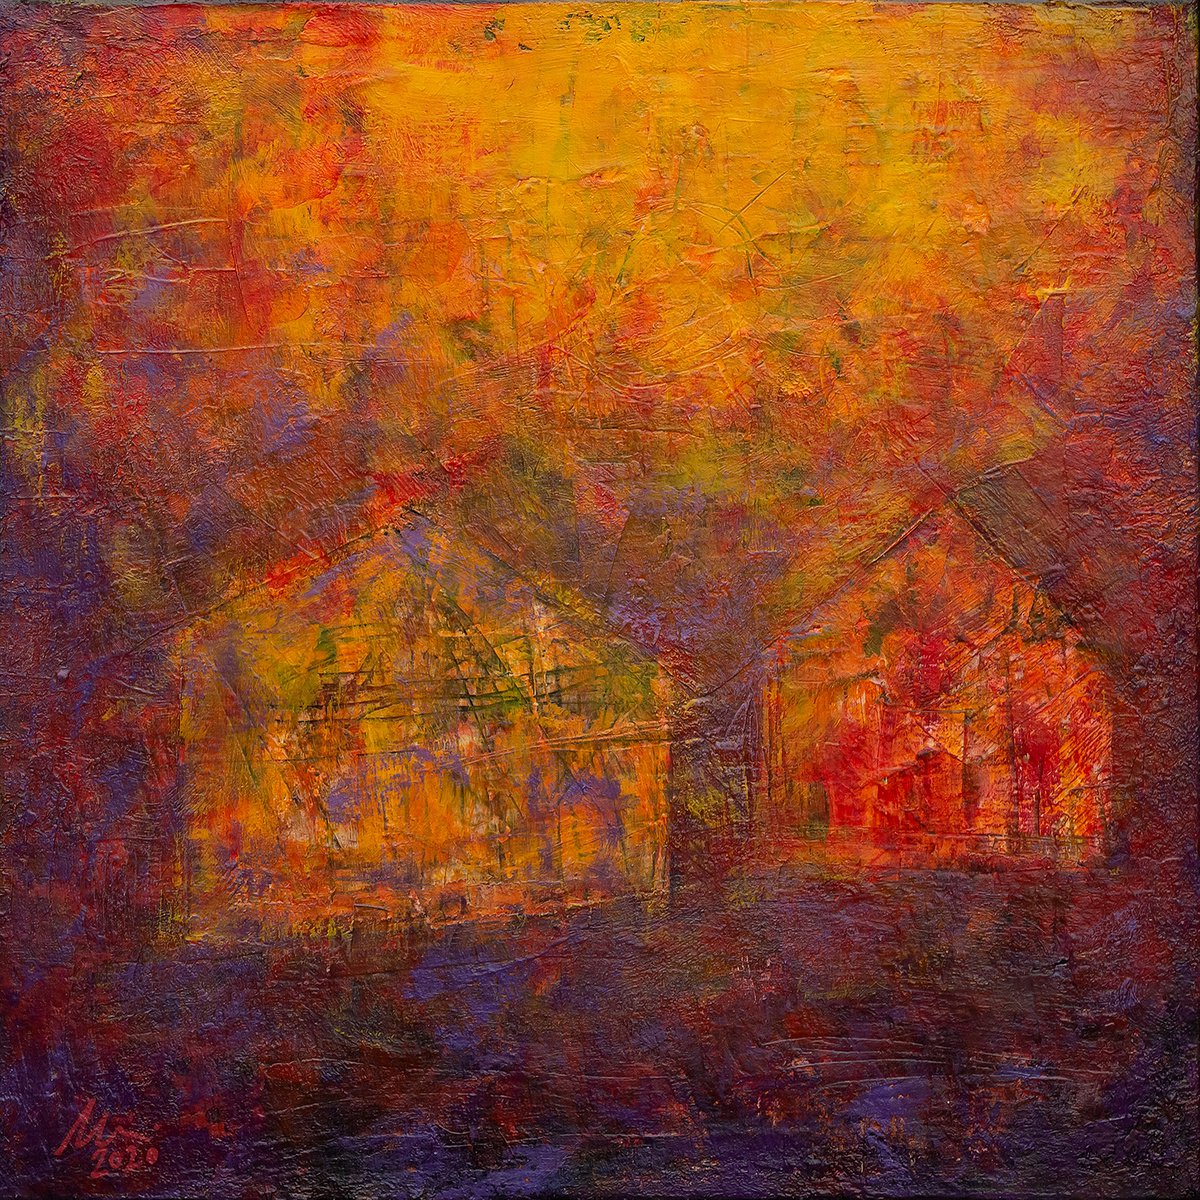 Village at dawn - Abstract painting by Peter Zelei